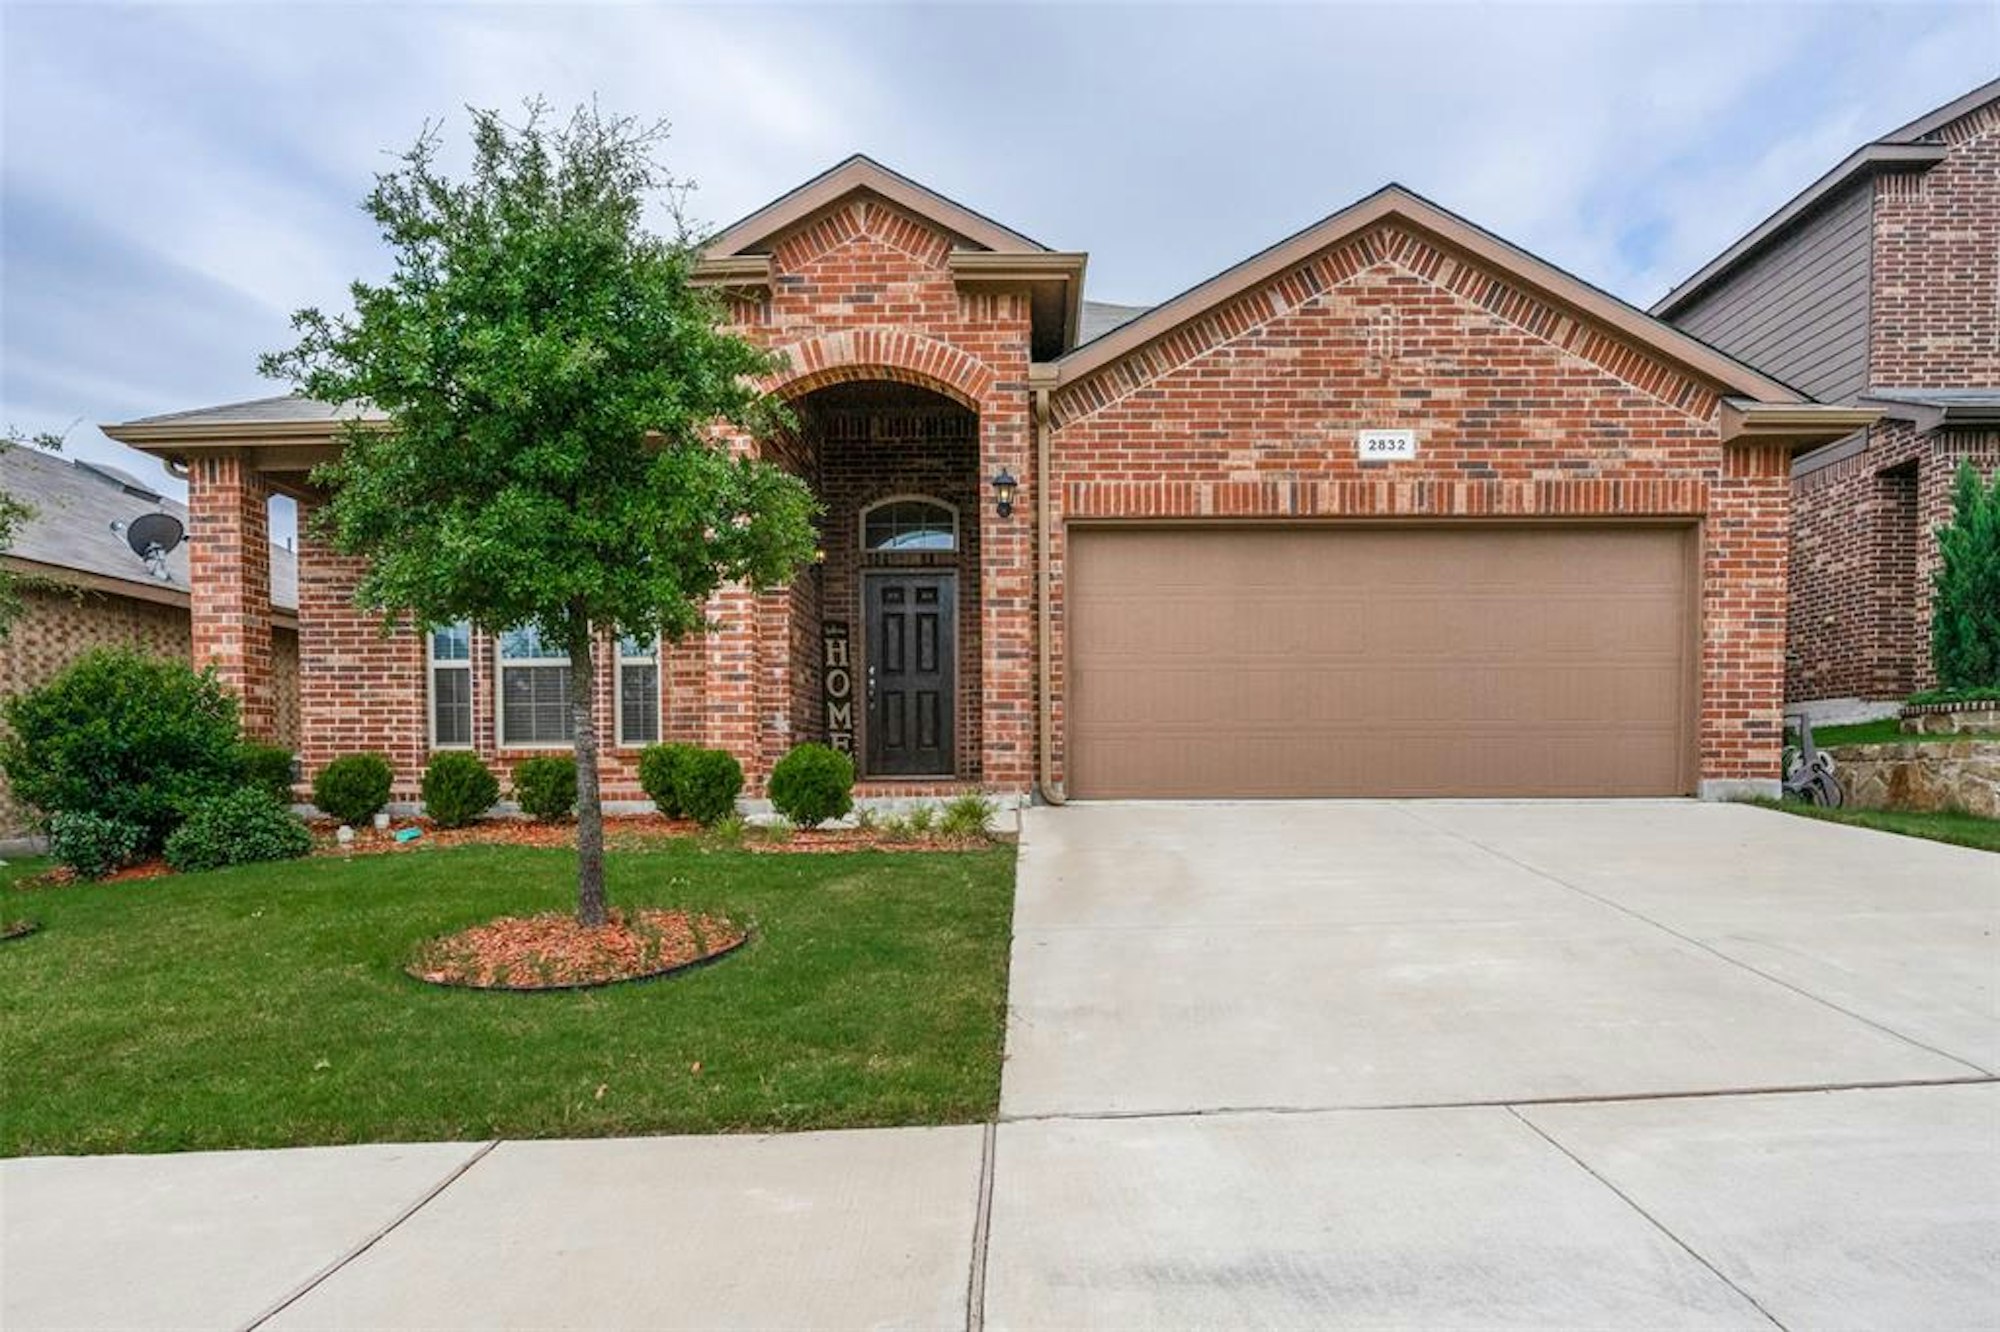 Photo 1 of 35 - 2832 Saddle Creek Dr, Fort Worth, TX 76177